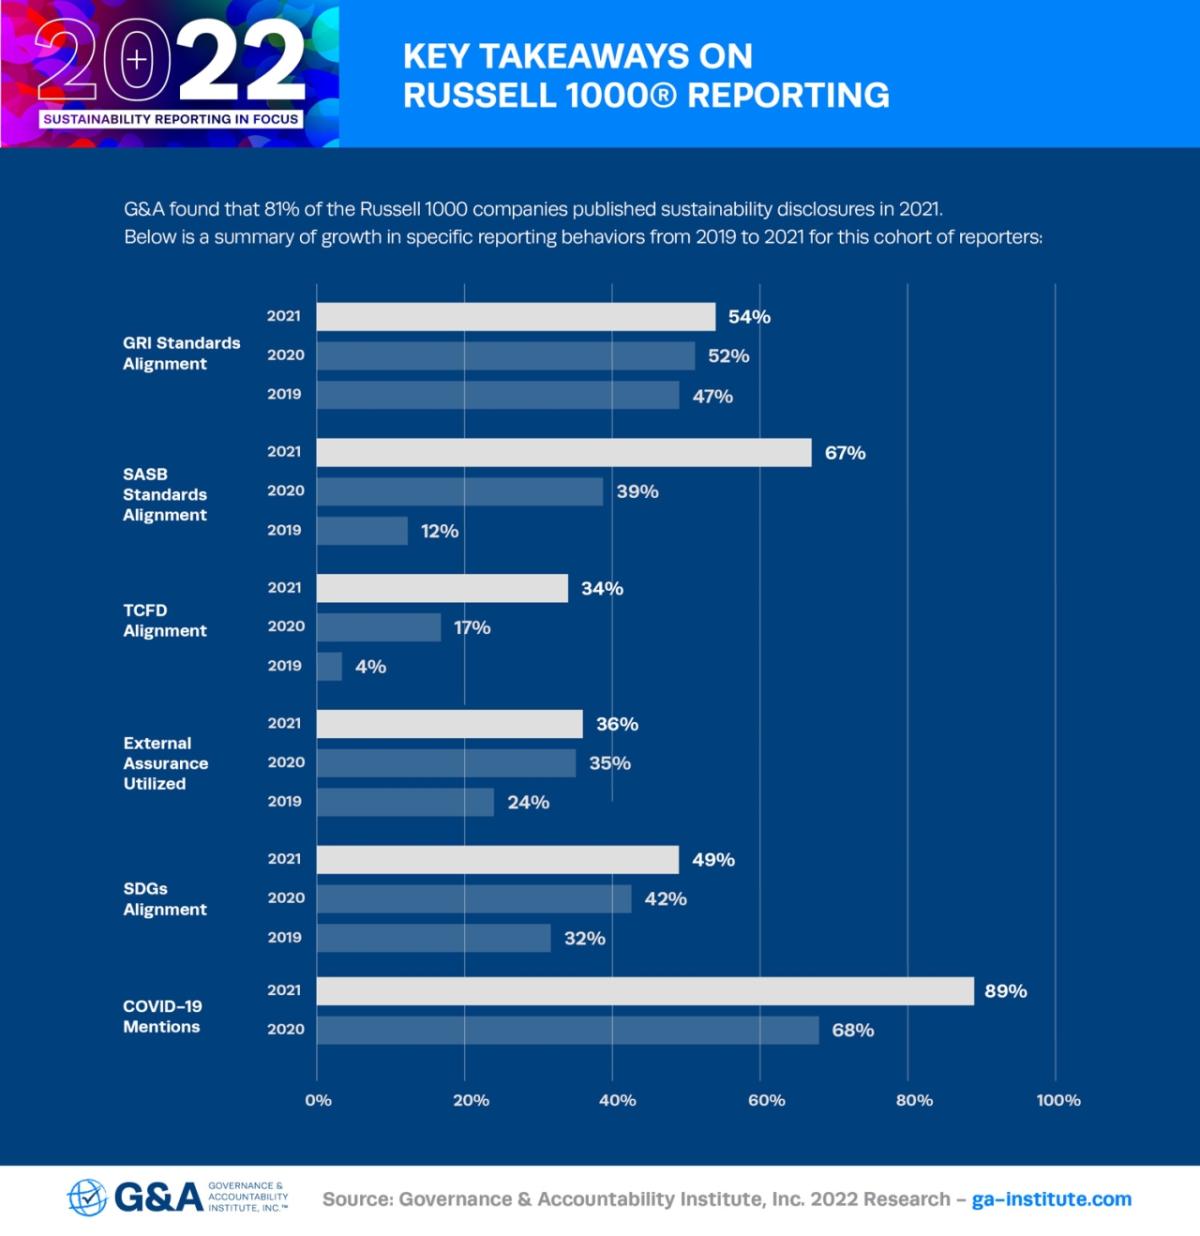 G&A’s 2022 Sustainability Reporting in Focus Key Takeaways 